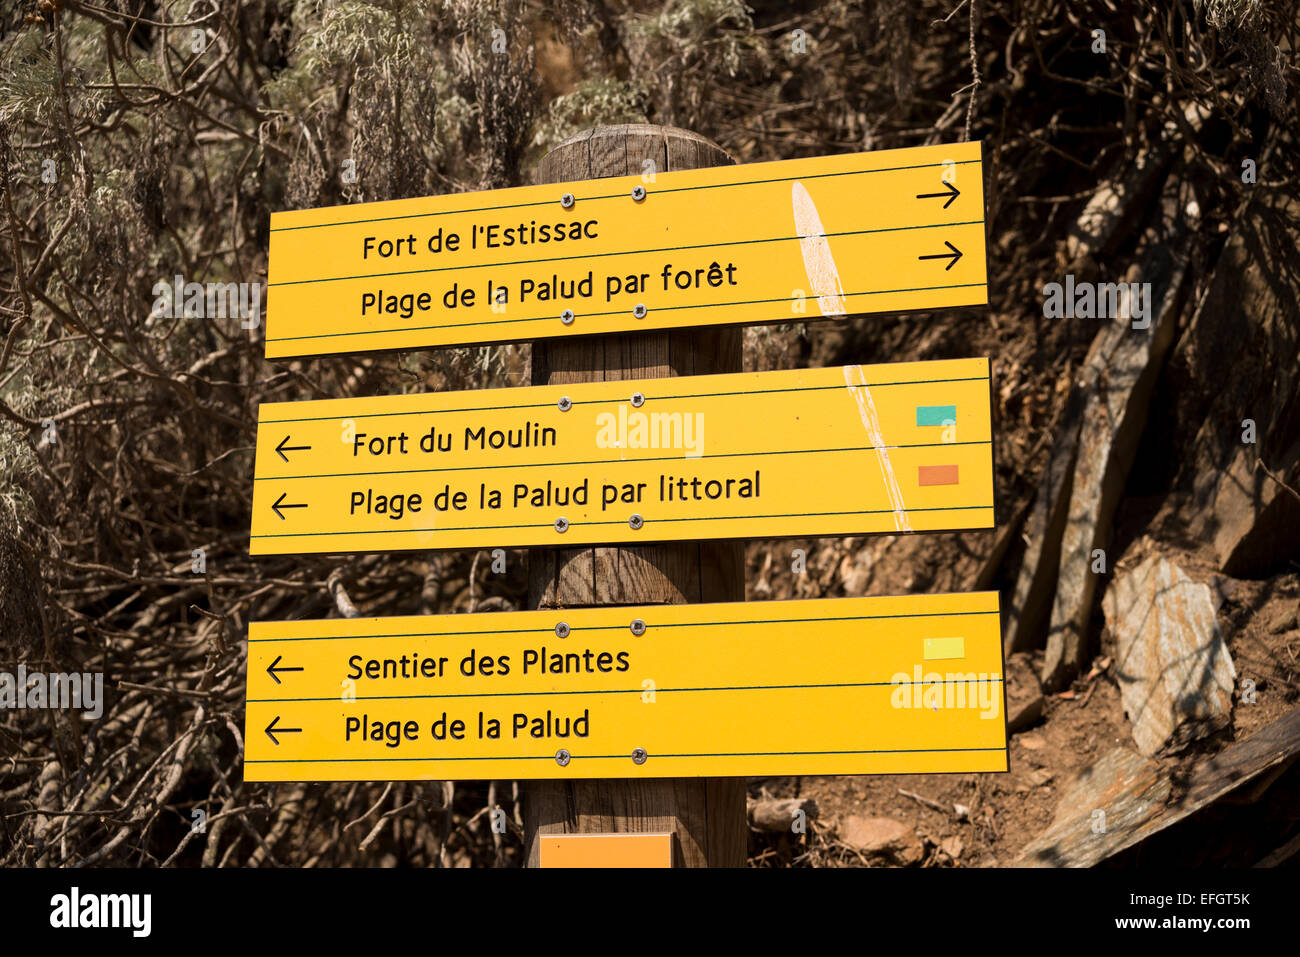 Signpost for directions to various places on the Island of Port Cros, Var, PACA, Provence-Alpes-Cote d'Azur, France Stock Photo